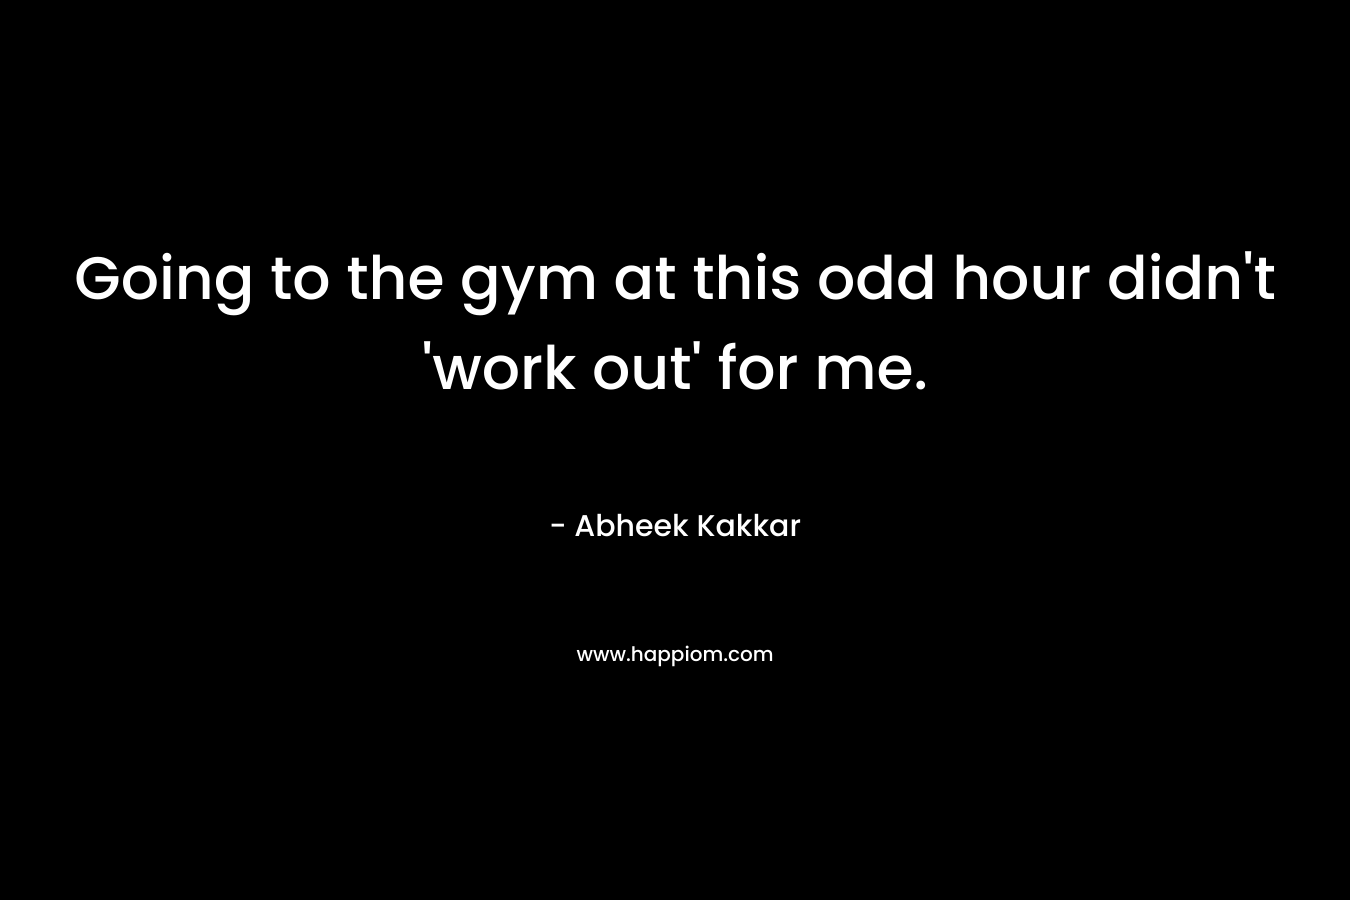 Going to the gym at this odd hour didn’t ‘work out’ for me. – Abheek Kakkar